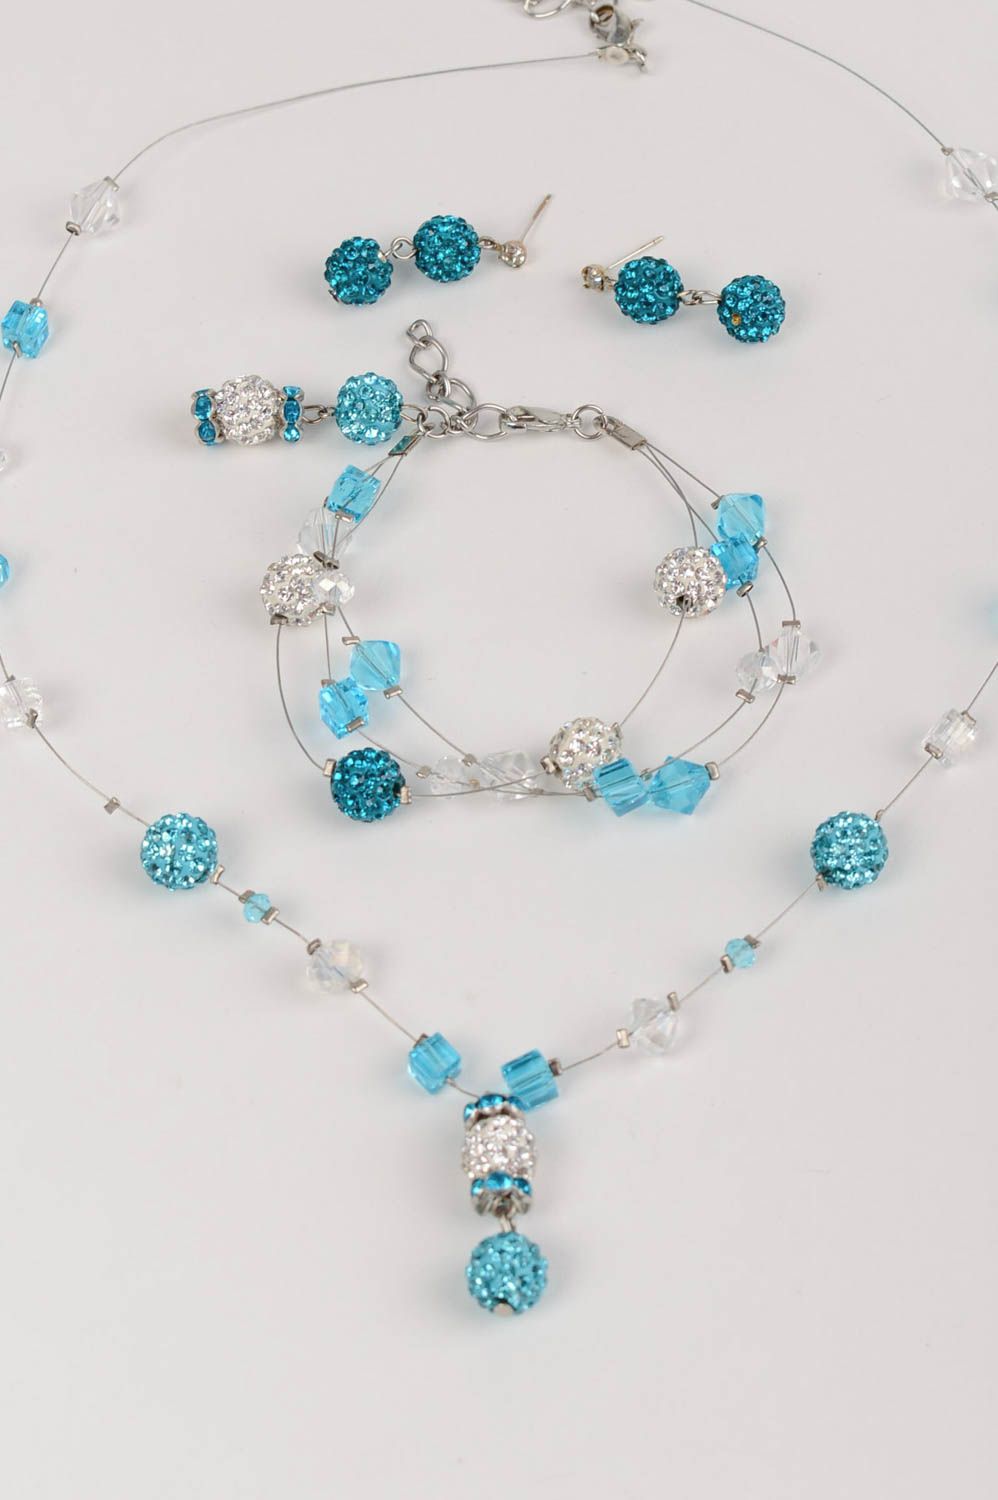 Set of handmade jewelry 3 pieces bracelet earrings and necklace in blue color photo 4